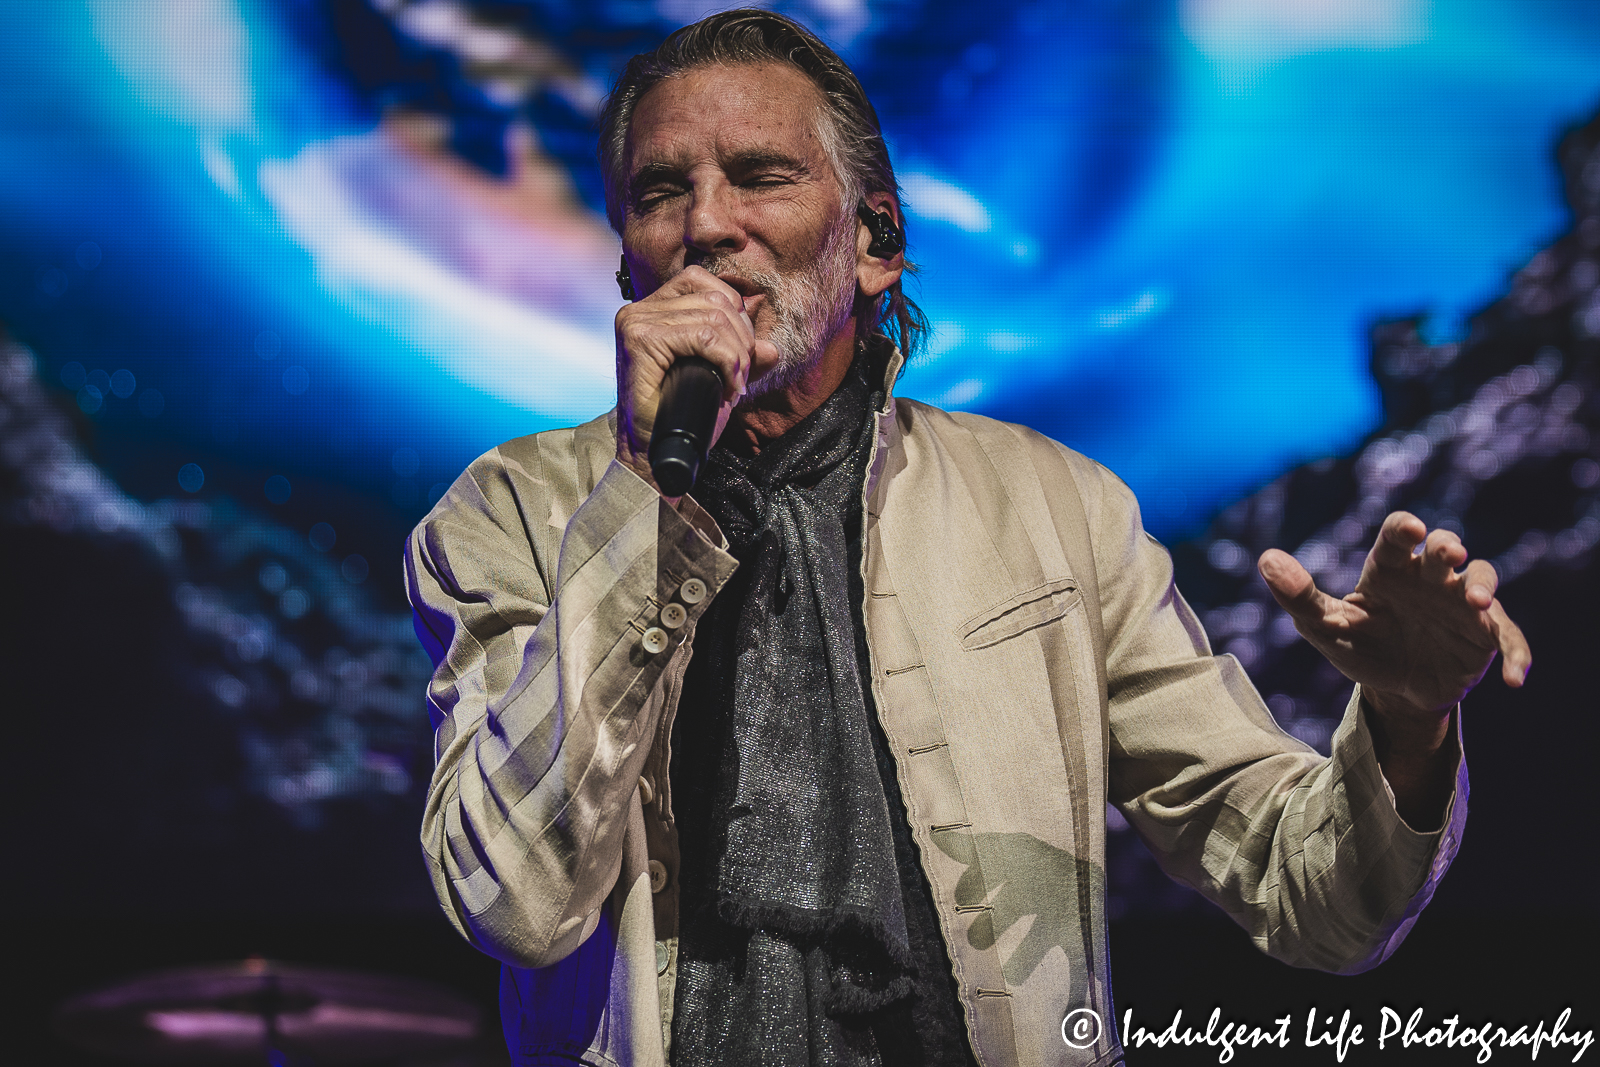 Kenny Loggins live in concert singing "Heart to Heart" during his "This Is It!" farewell tour stop at The Family Arena in St. Charles, MO on August 17, 2023.